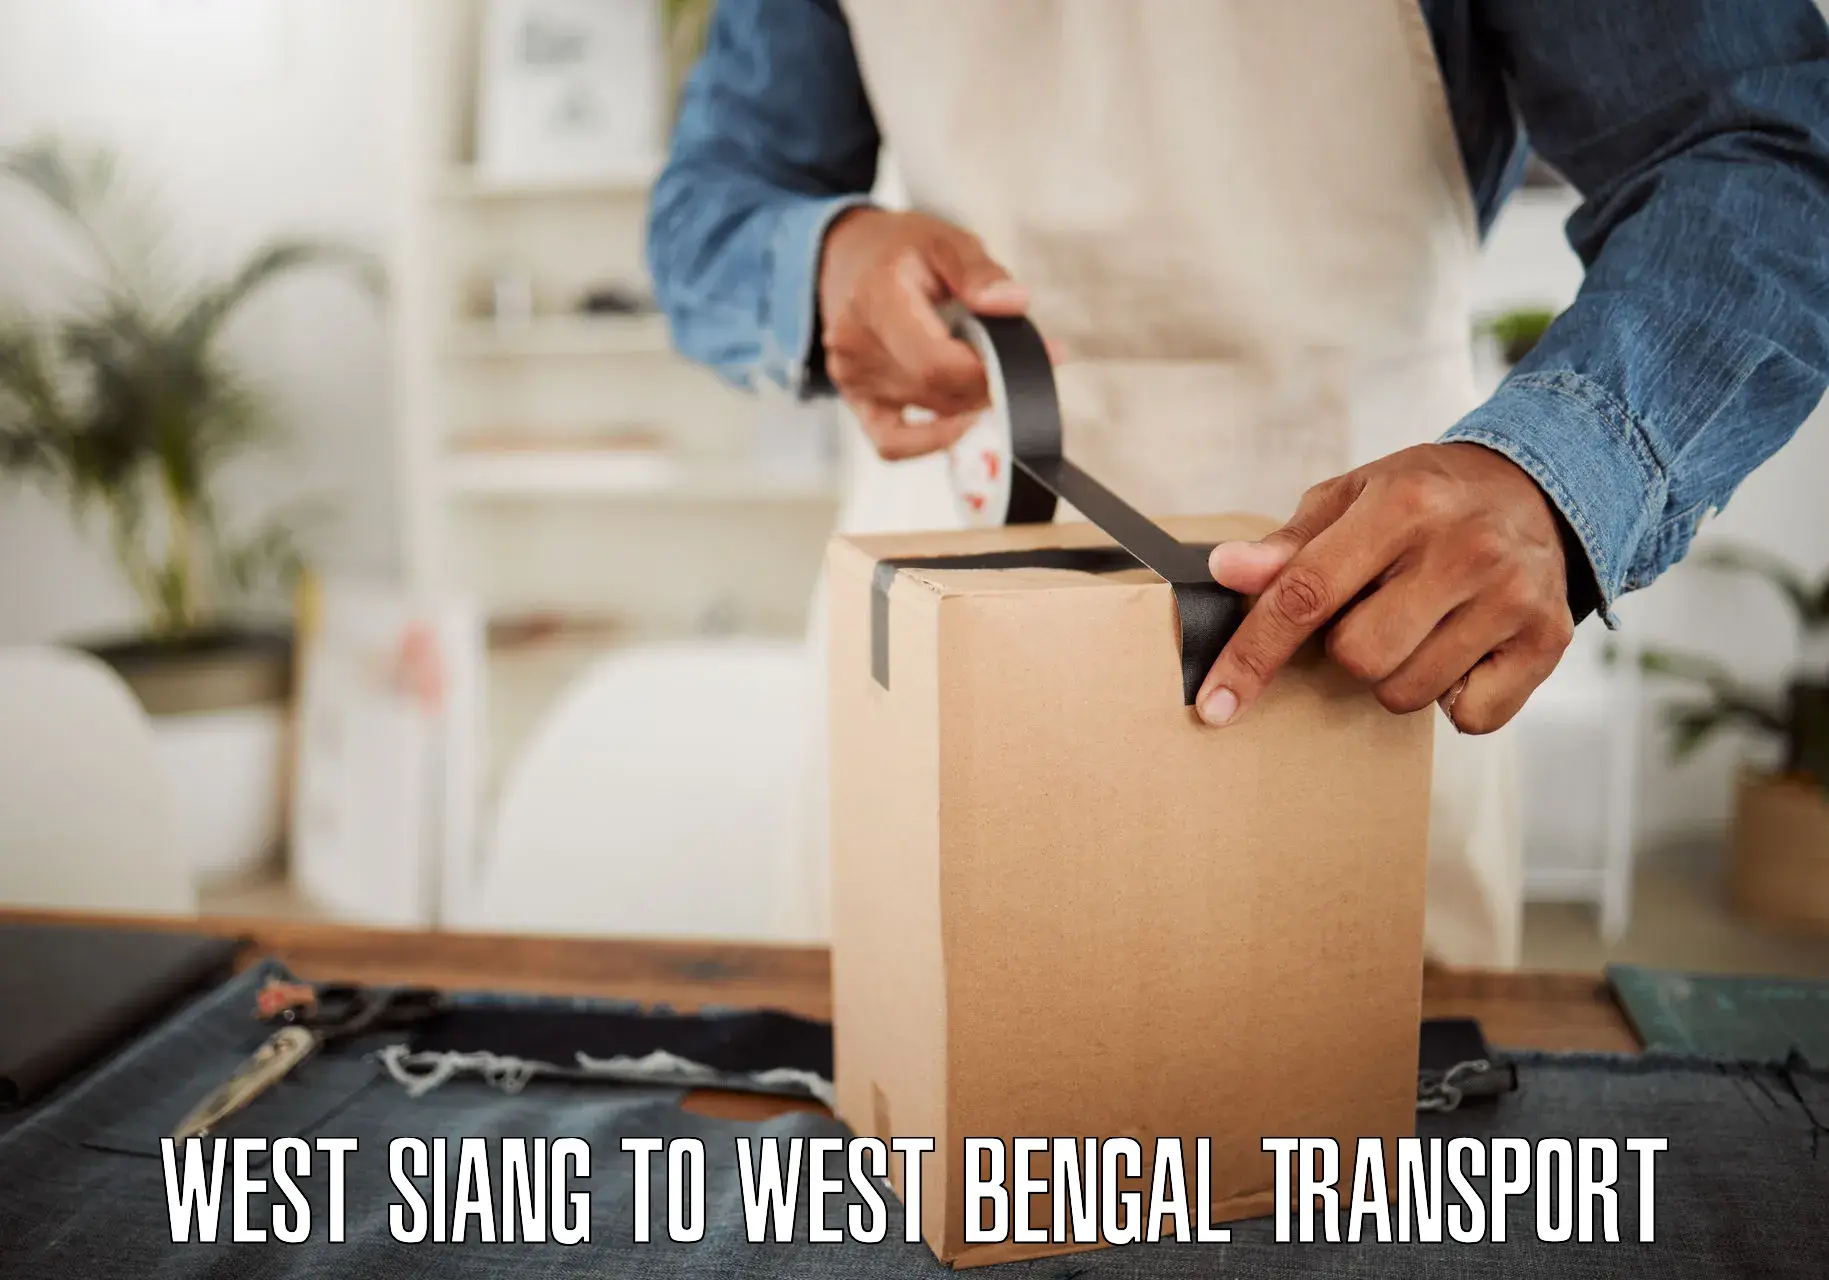 Express transport services West Siang to Budge Budge